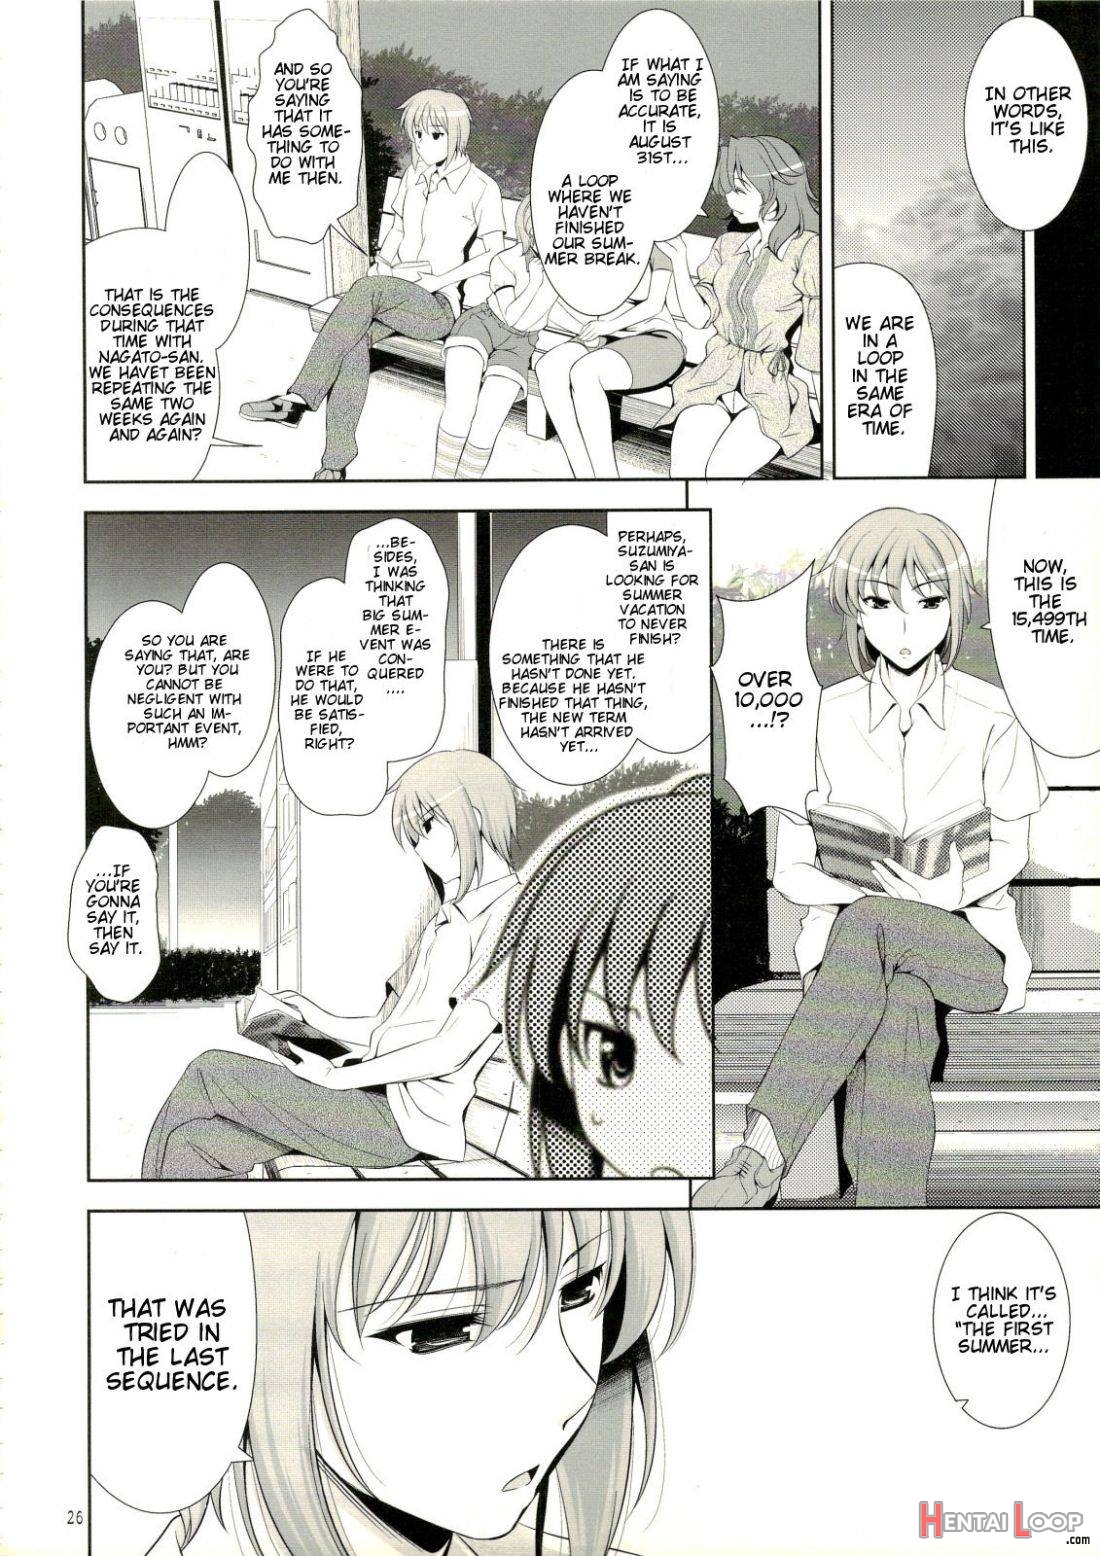 Manatsu no Yo no Yume no Mata Yume no Mata Yume page 23